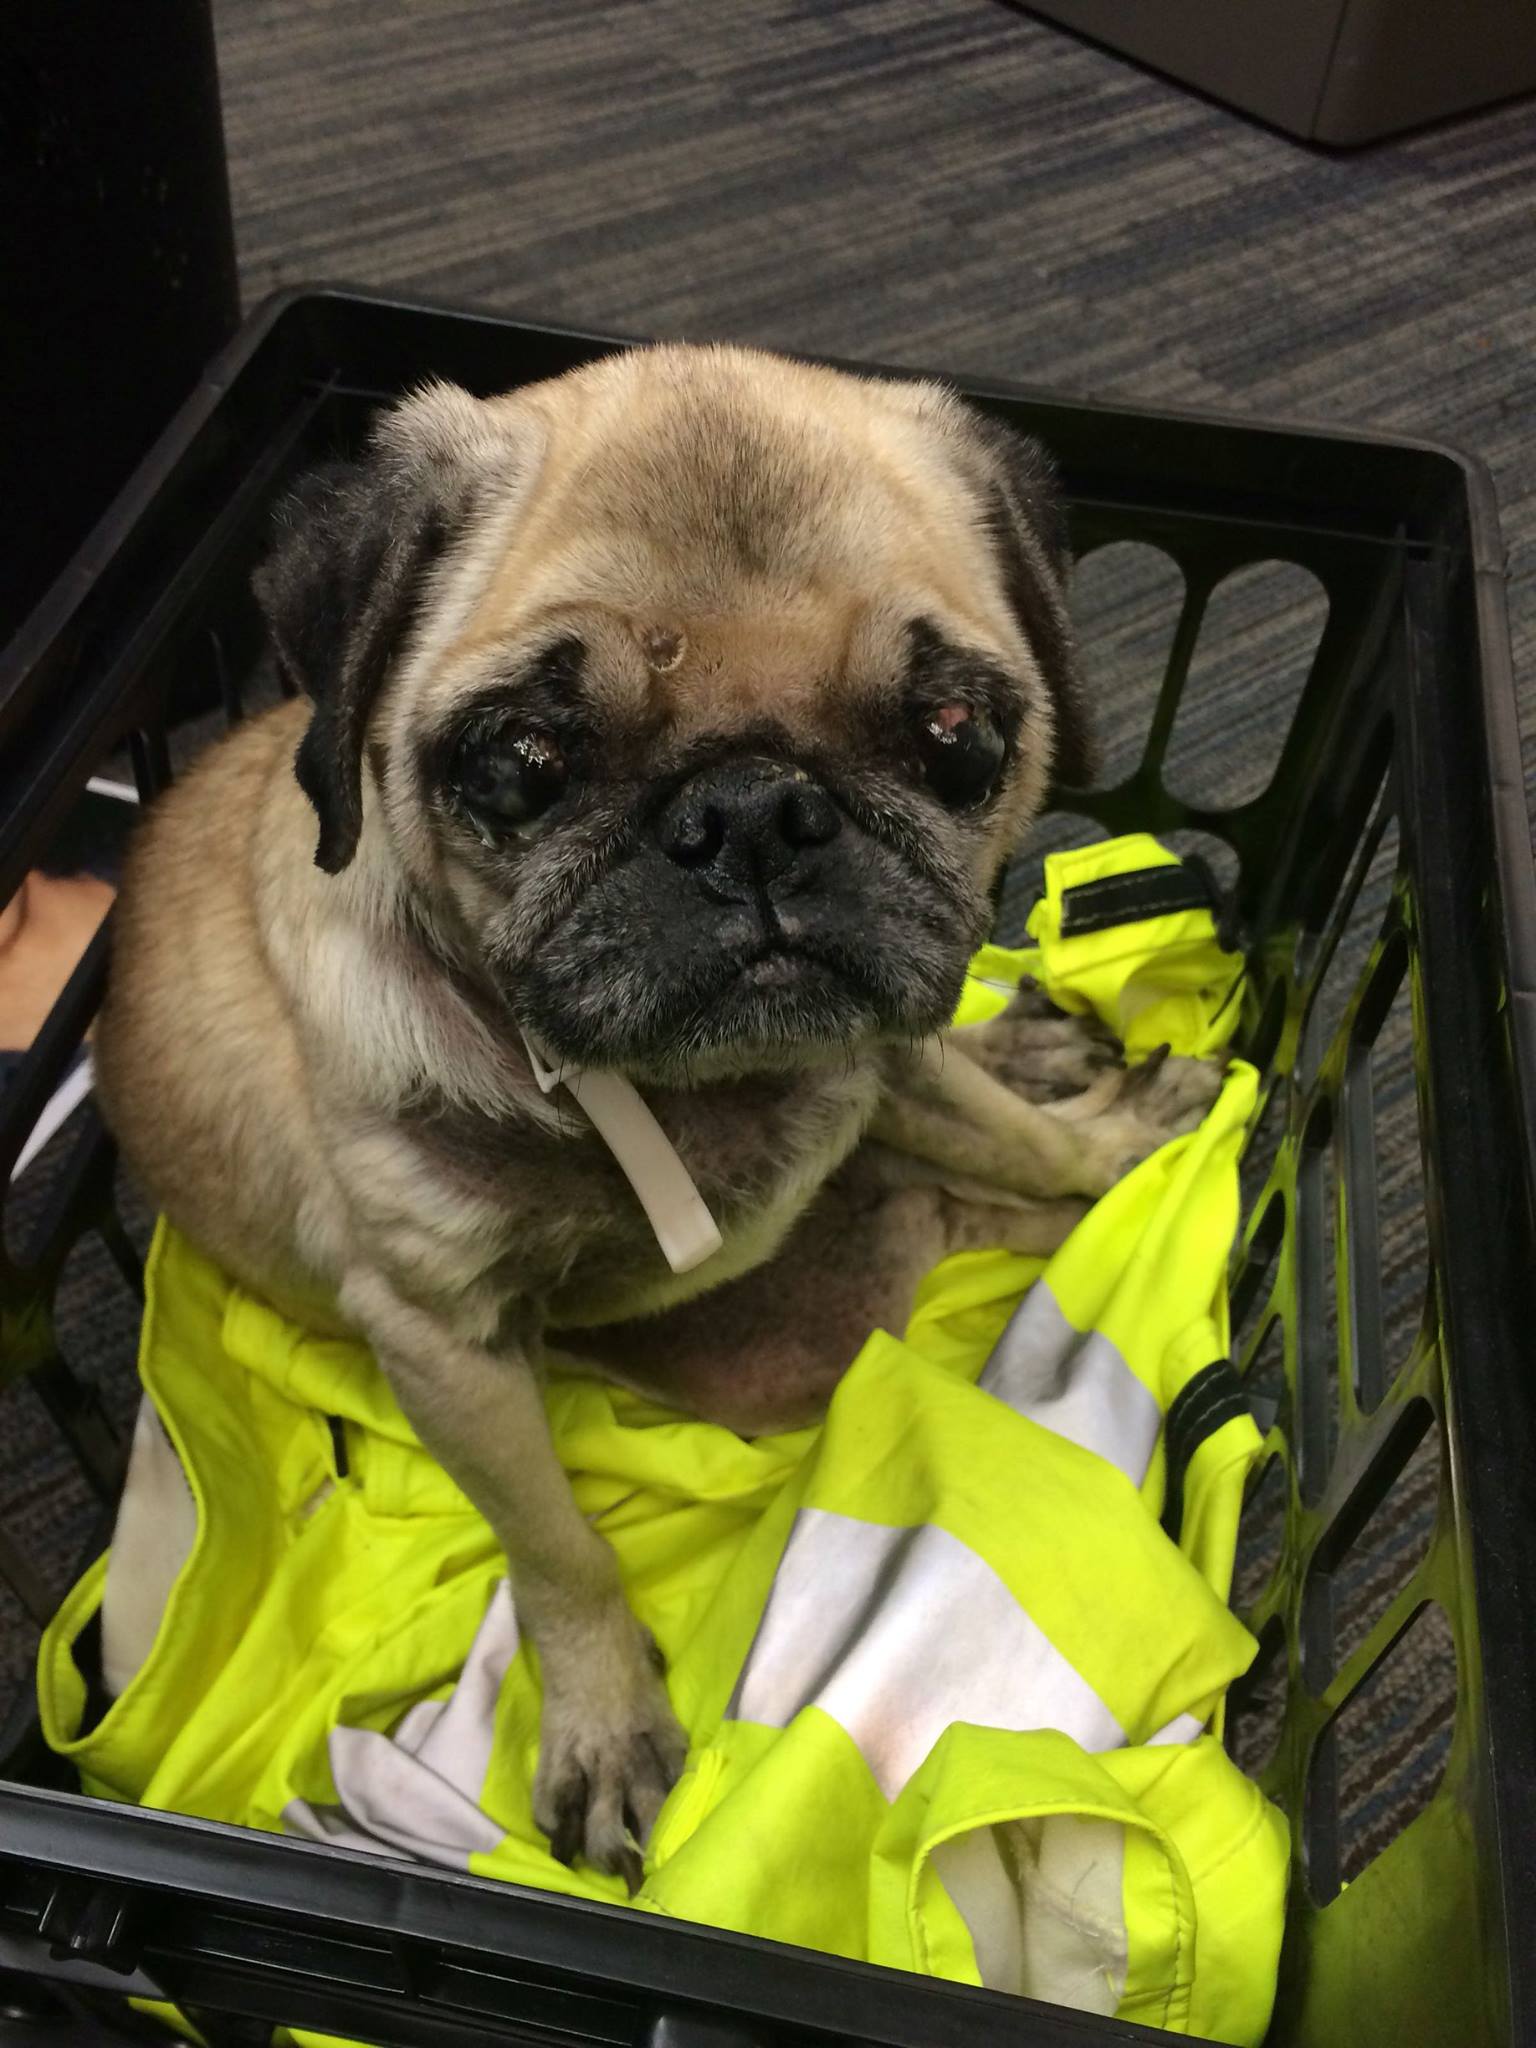 Look familiar? A Vancouver police sergeant found this pug while returning from a call Thursday. The dog has a microchip implanted, but it didn't appear to be registered to anyone, so officials are looking for her owner.